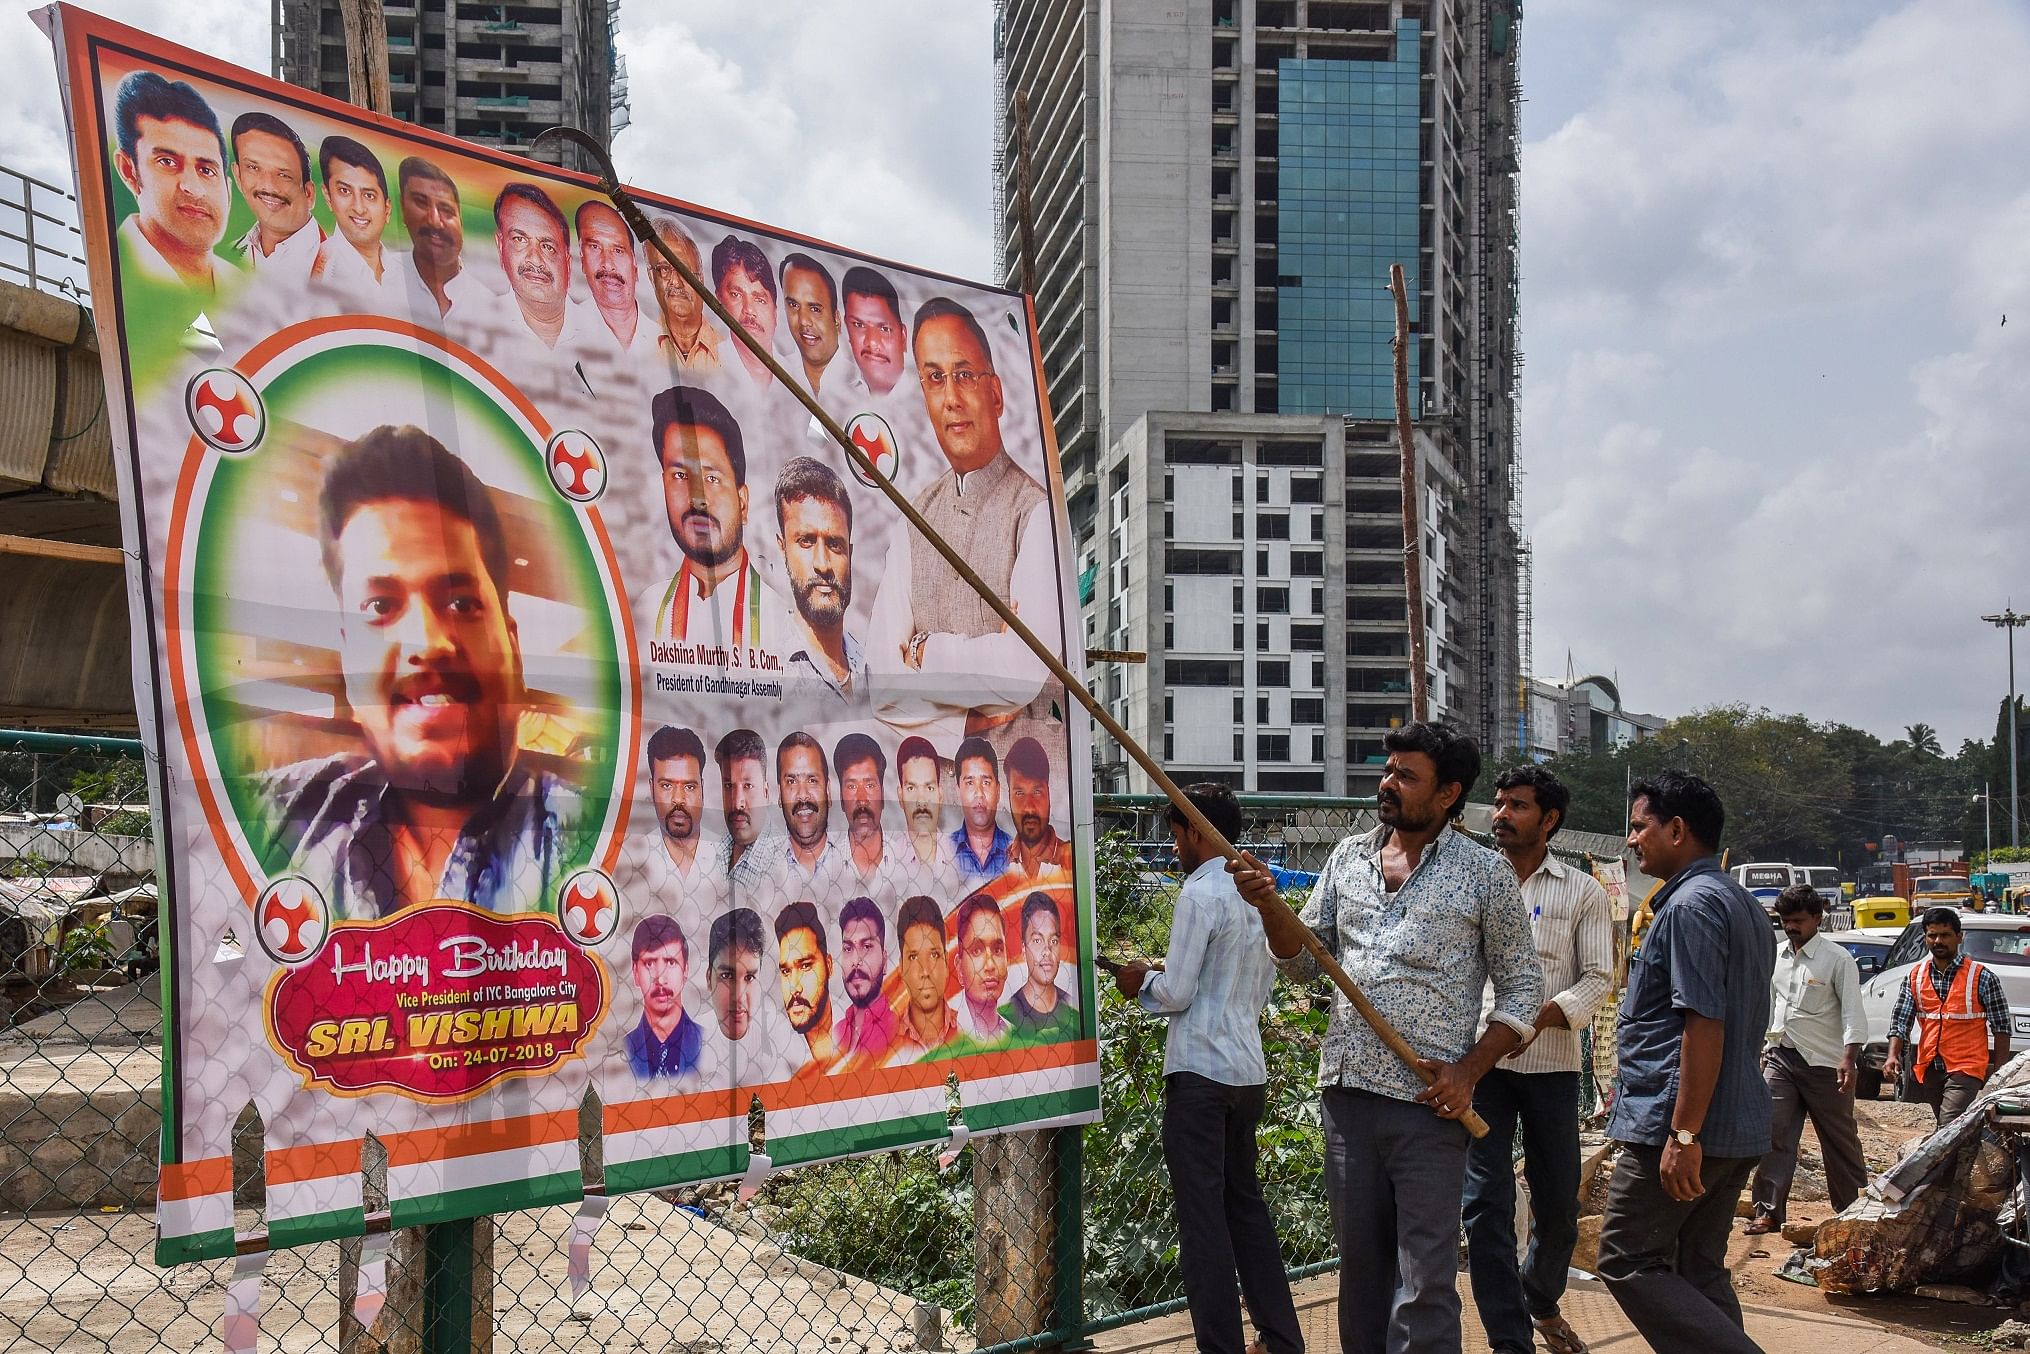 BBMP is removing illegal flexes across the city, following a High Court order. This display was on Sampige Road, Malleswaram, and was pulled down on August 2.